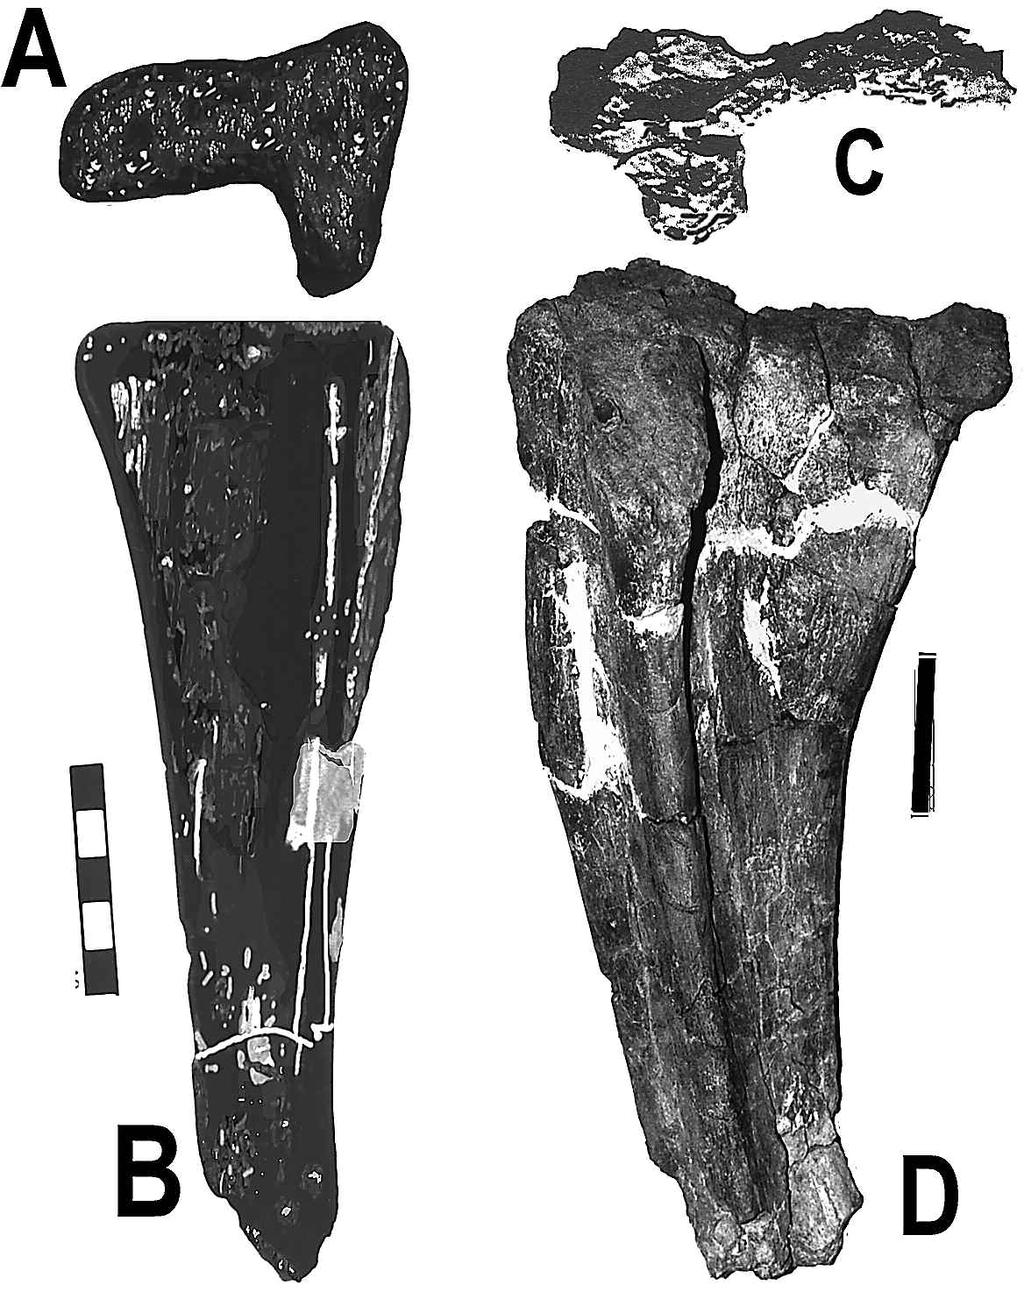 ORYCTOS, Vol. 2, 1999 The right ulna is incomplete, lacking the distal third. The olecranon is slightly damaged, but was clearly not as tall as Brachiosaurus or Sonorosaurus.